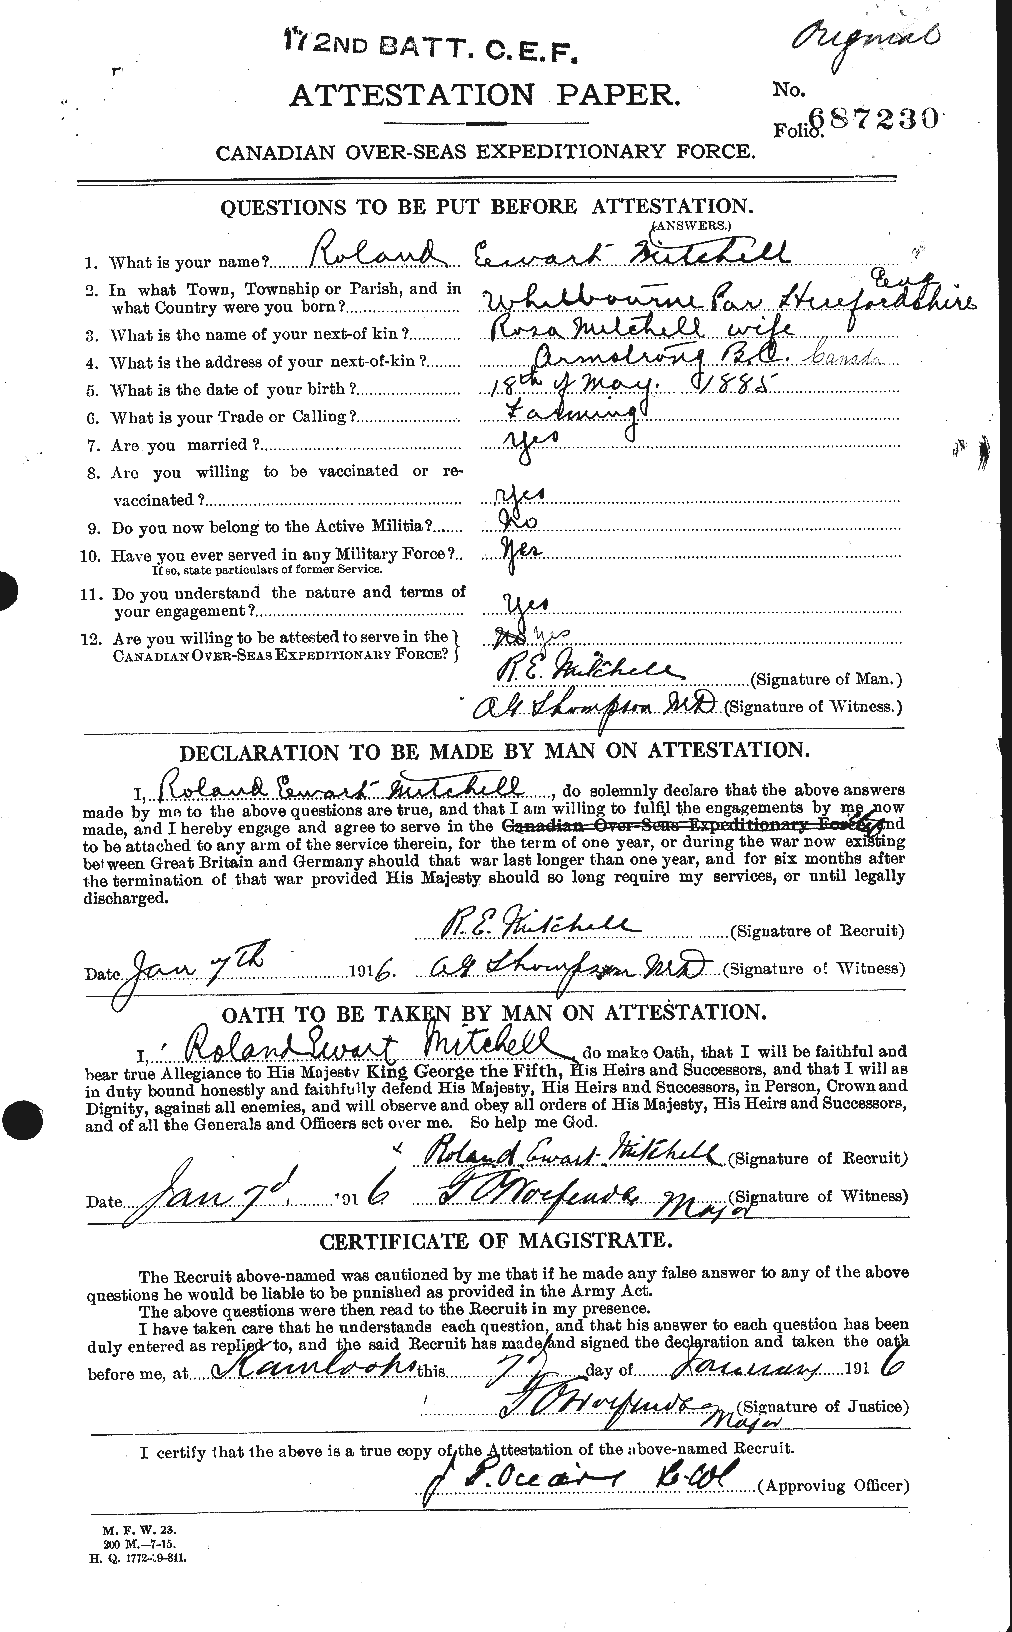 Personnel Records of the First World War - CEF 499875a